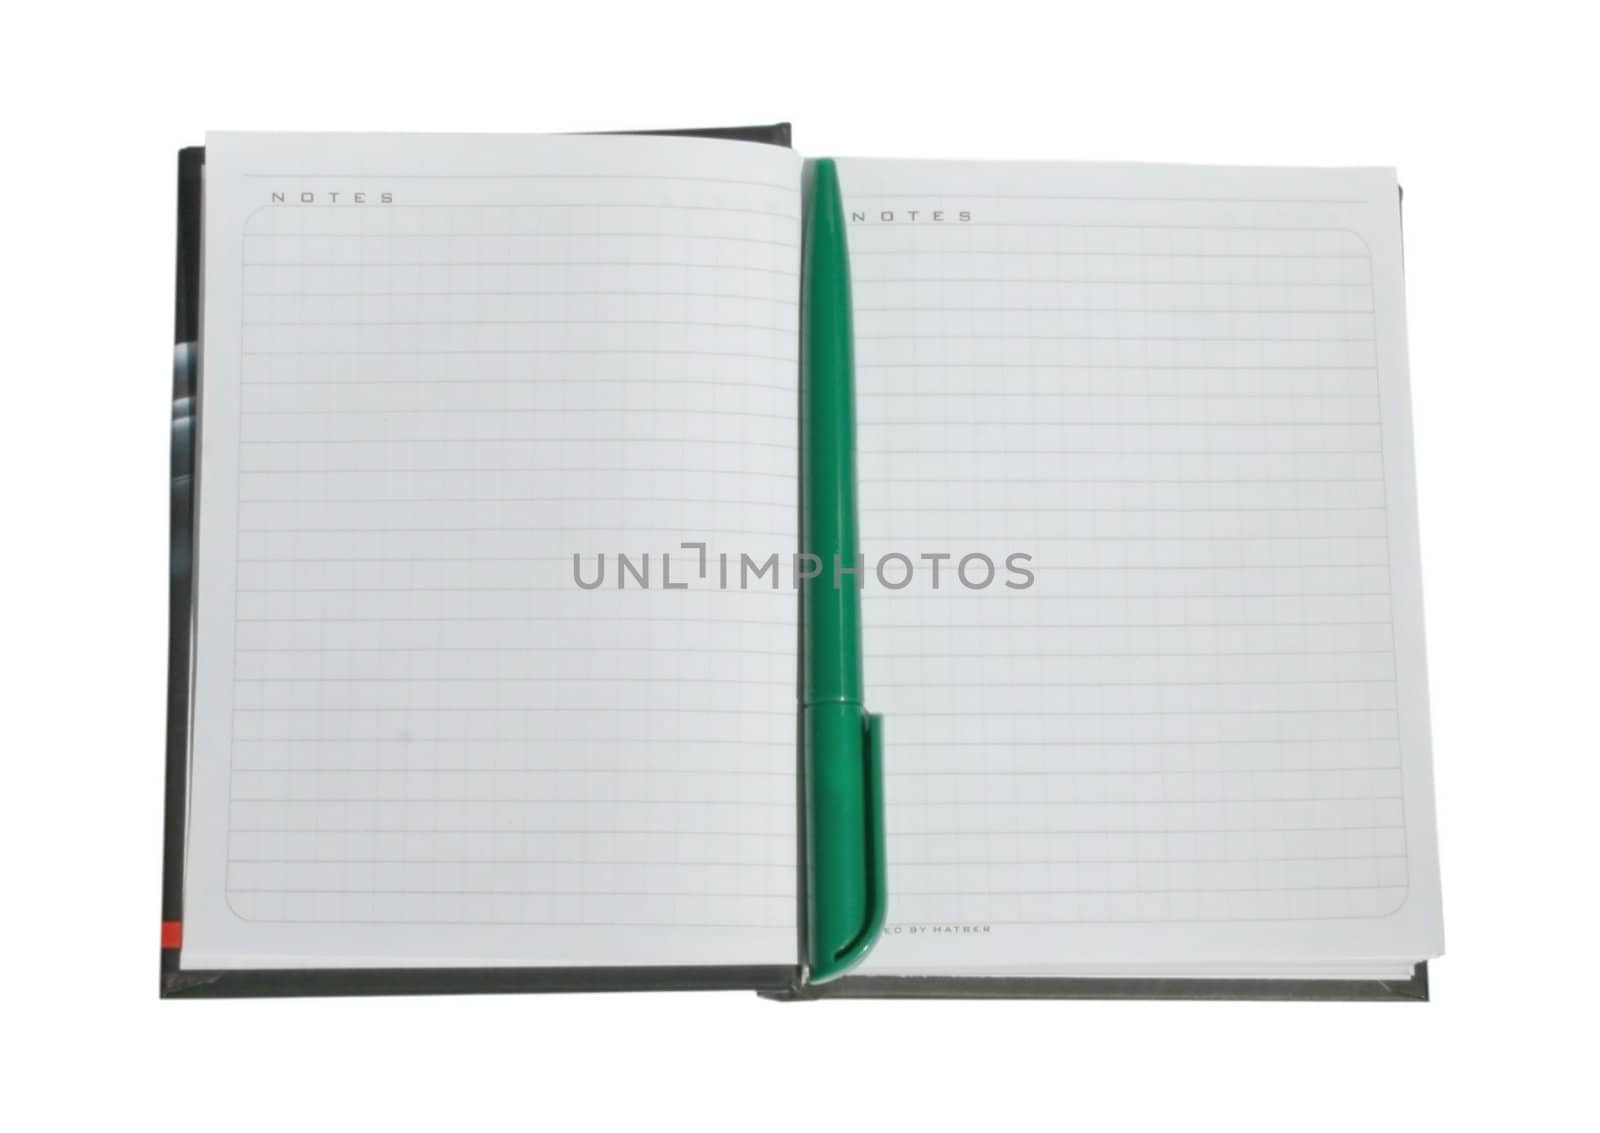 Notebook on a white background.